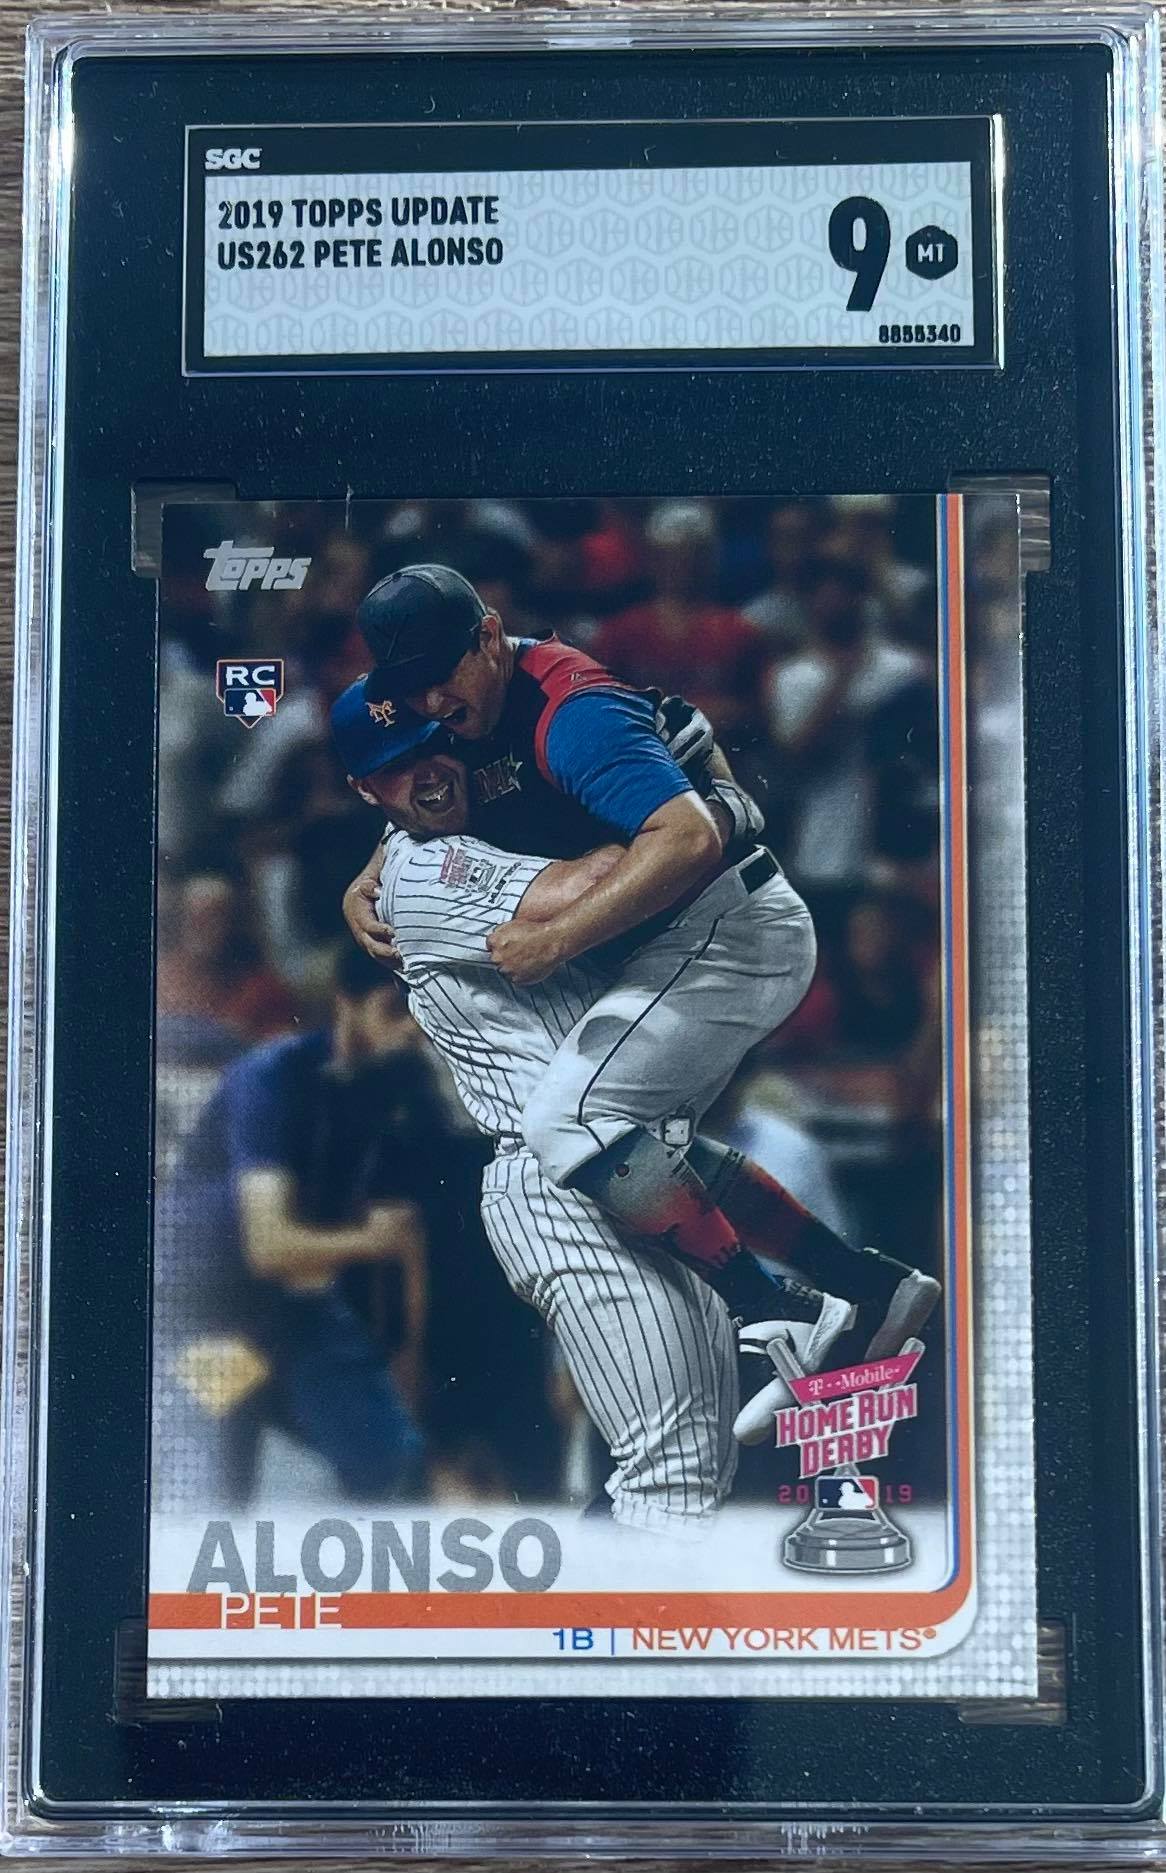 2019 Topps Update Pete Alonzo Rookie Card SGC 9